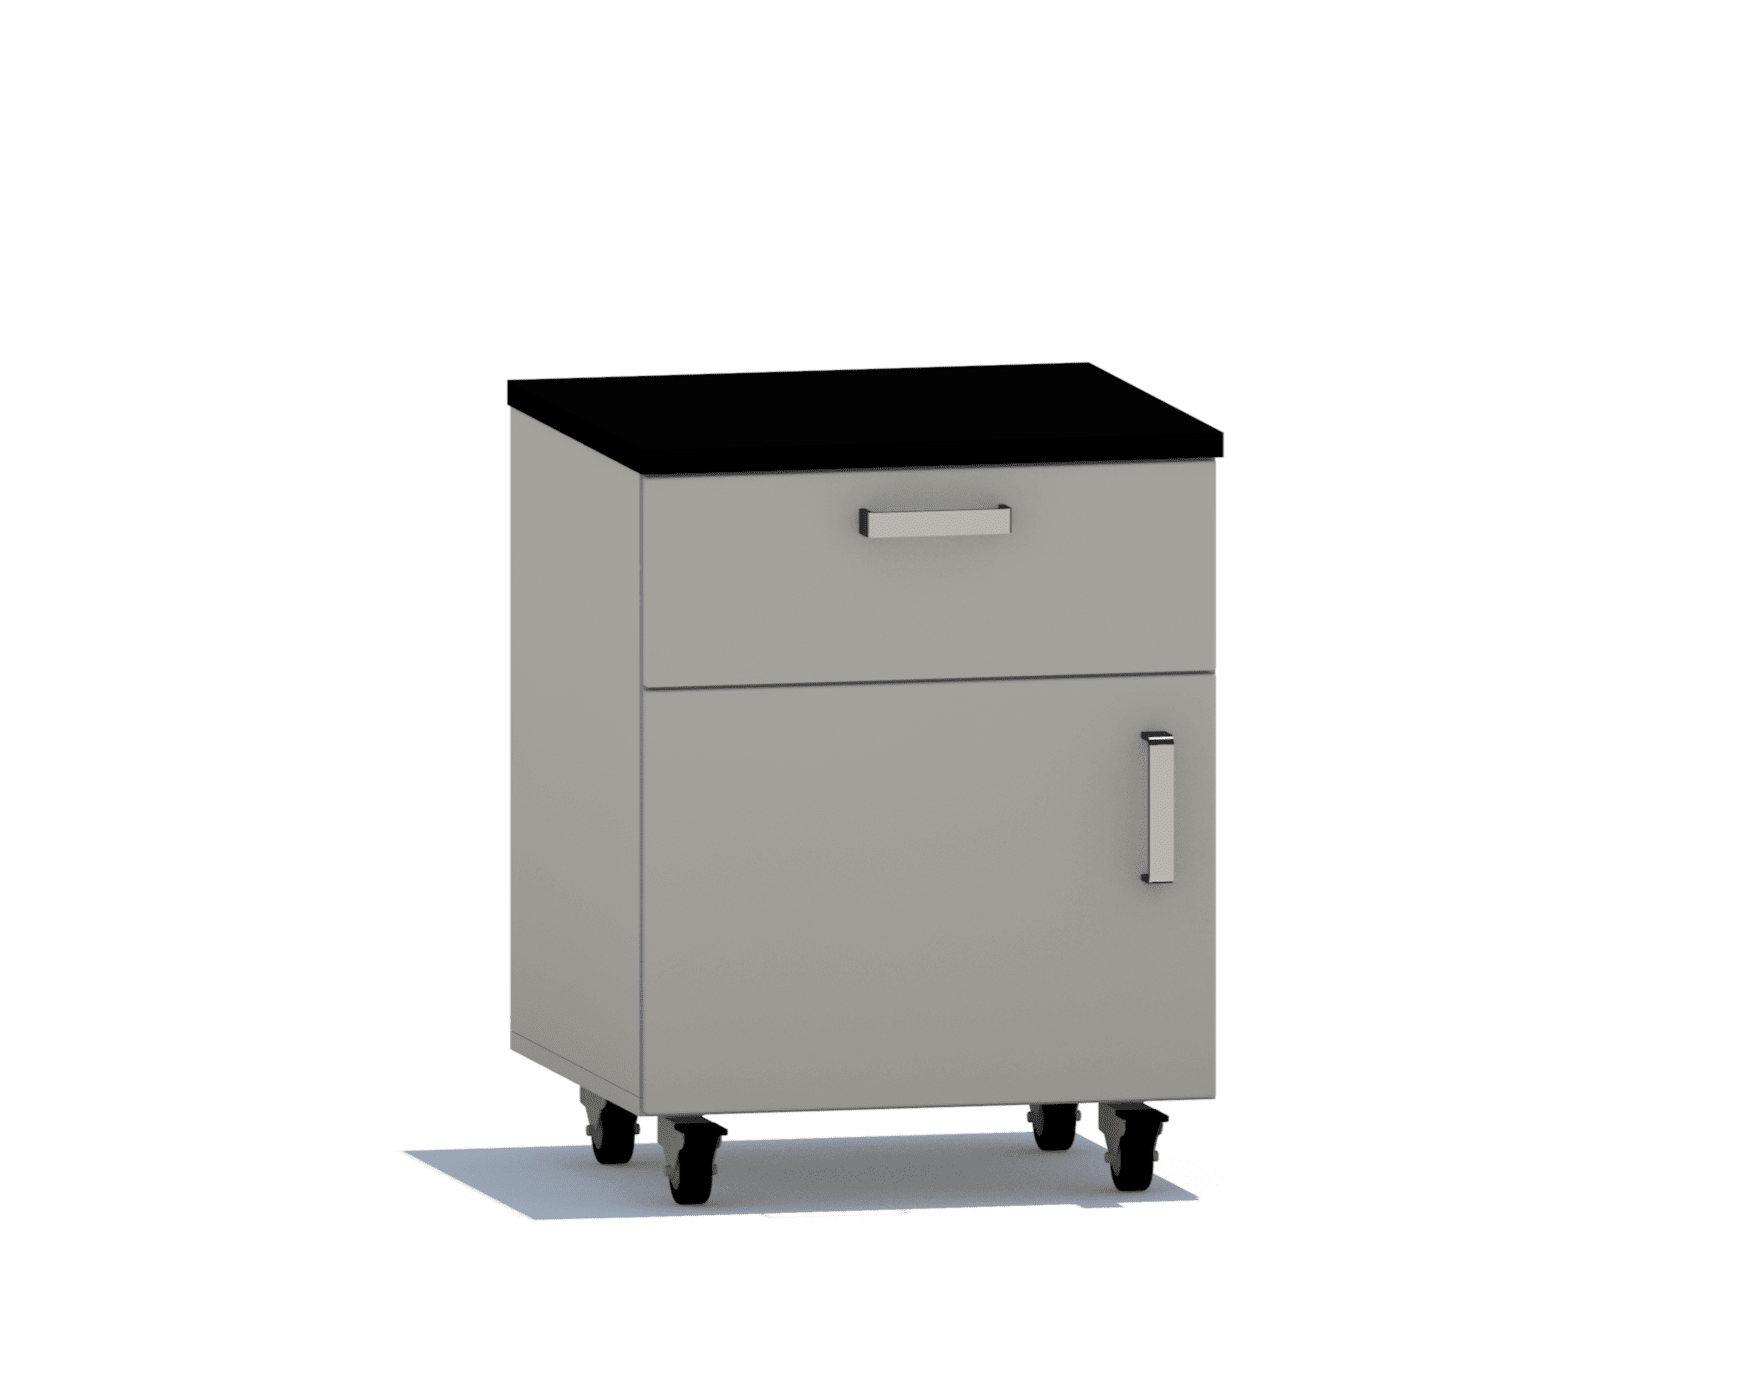 Combo Storage Unit Workstations omnilabsolutions 24 wide Yes 